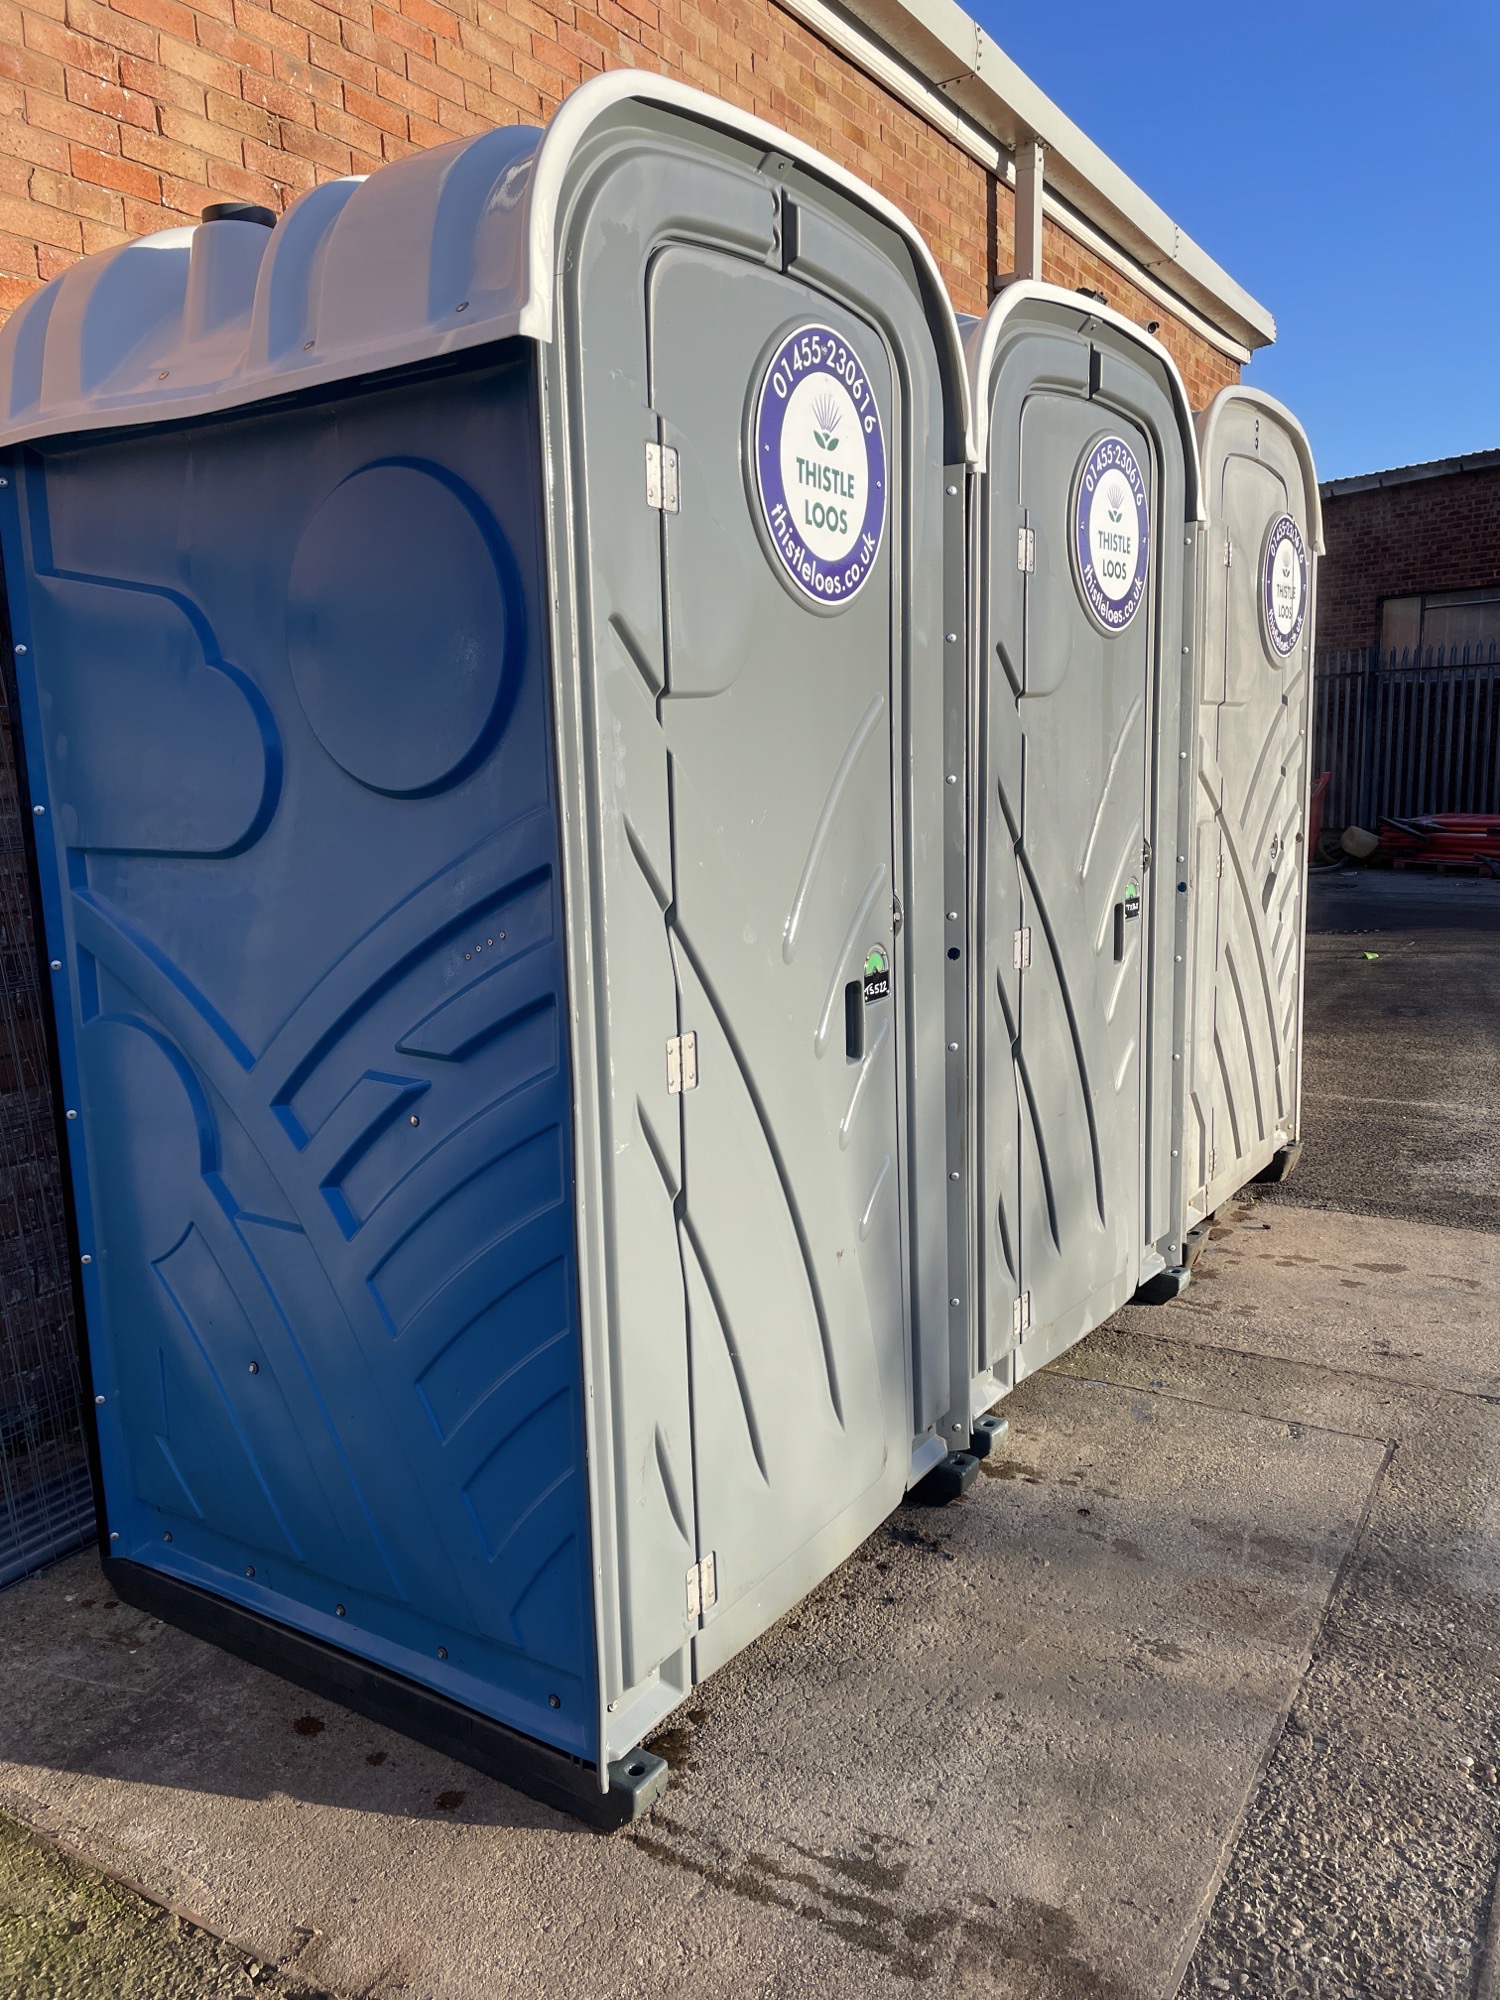 Thistle Loos Site Toilet Hire